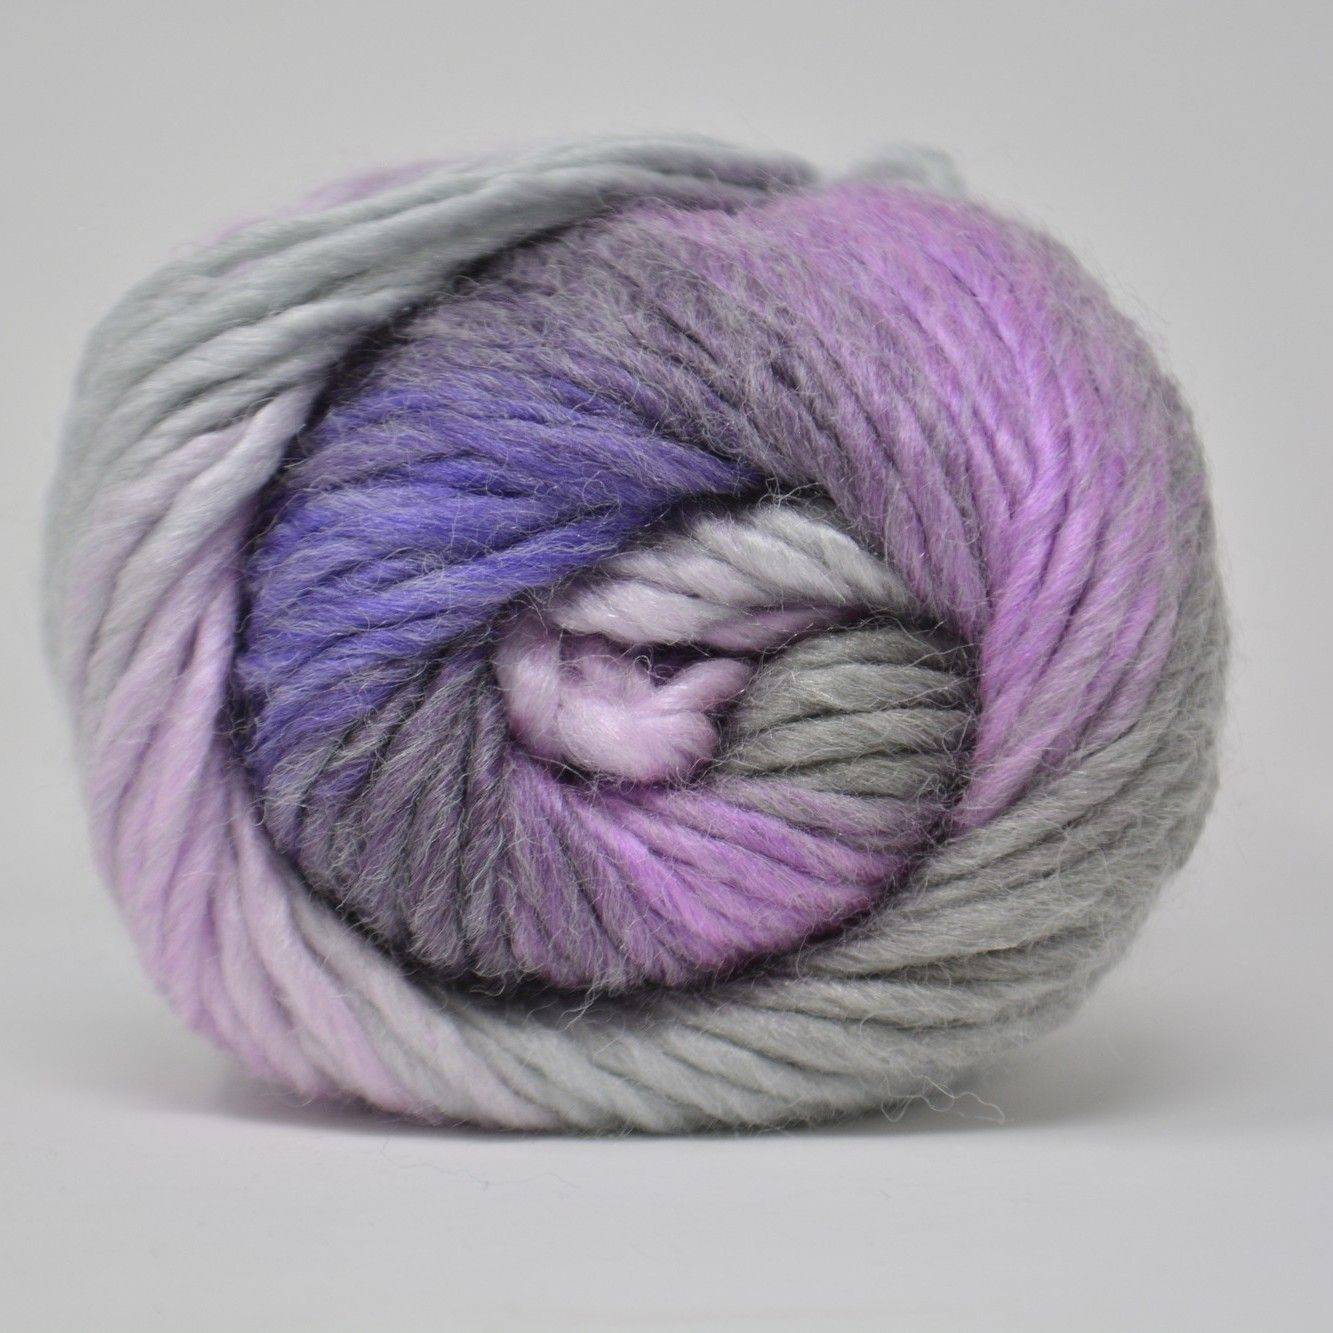 King Cole Riot Chunky - Carousel (3881) | The Knitting Network